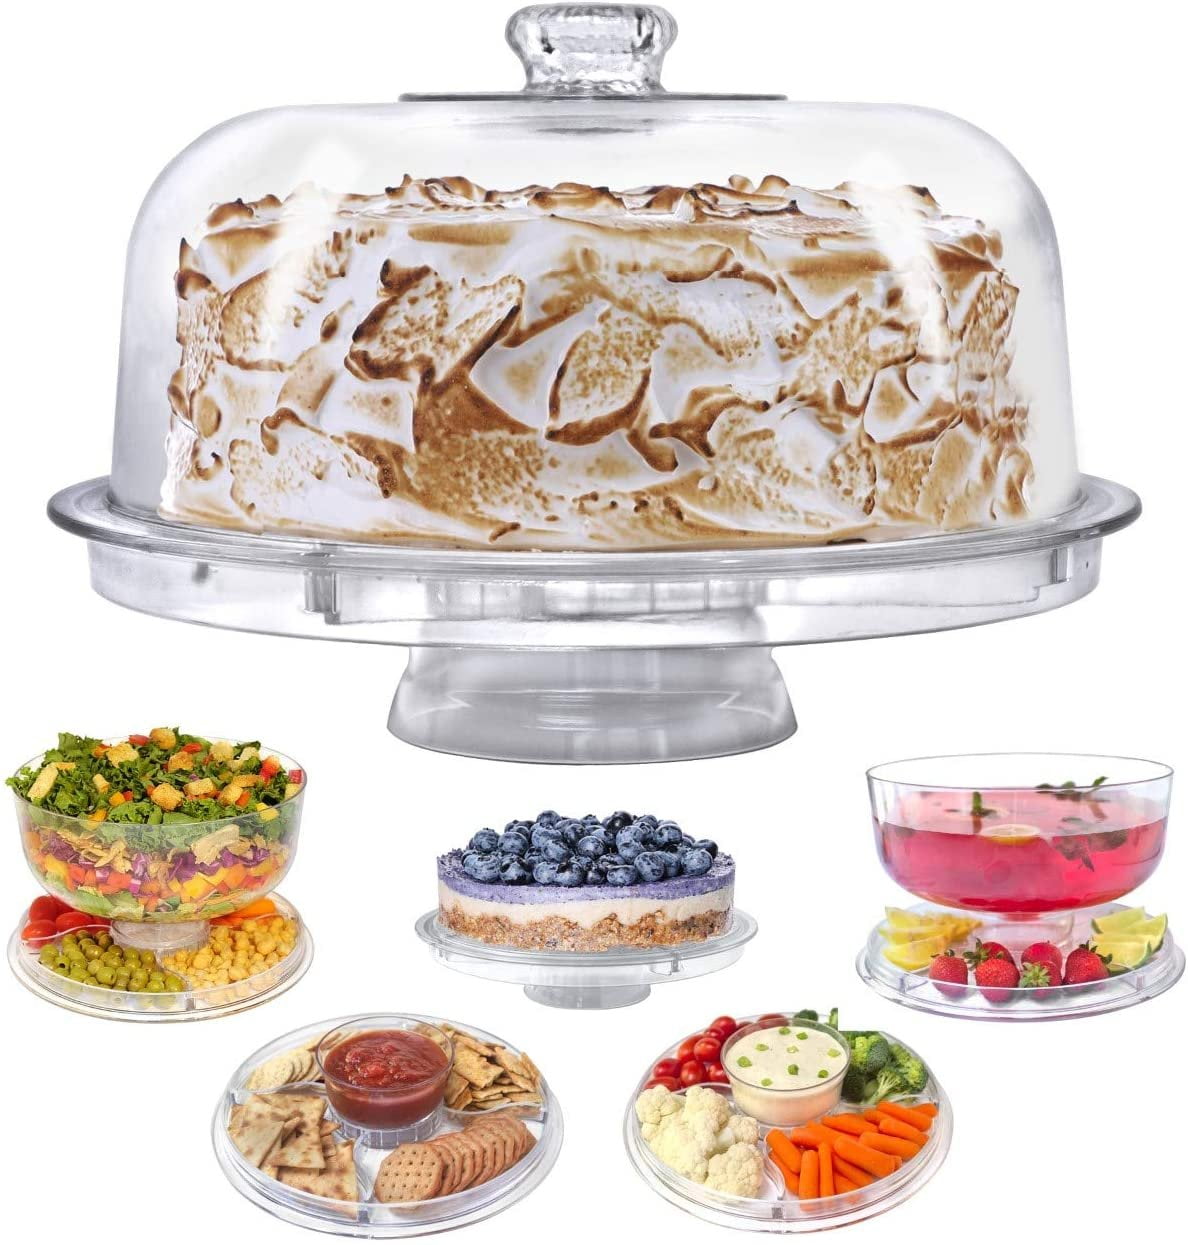 Cake Stand with Dome Cover, 6-in-1 Multi-Purpose Use, Serving Platter,  Punch Bowl, Desert Platter And More, BPA Free